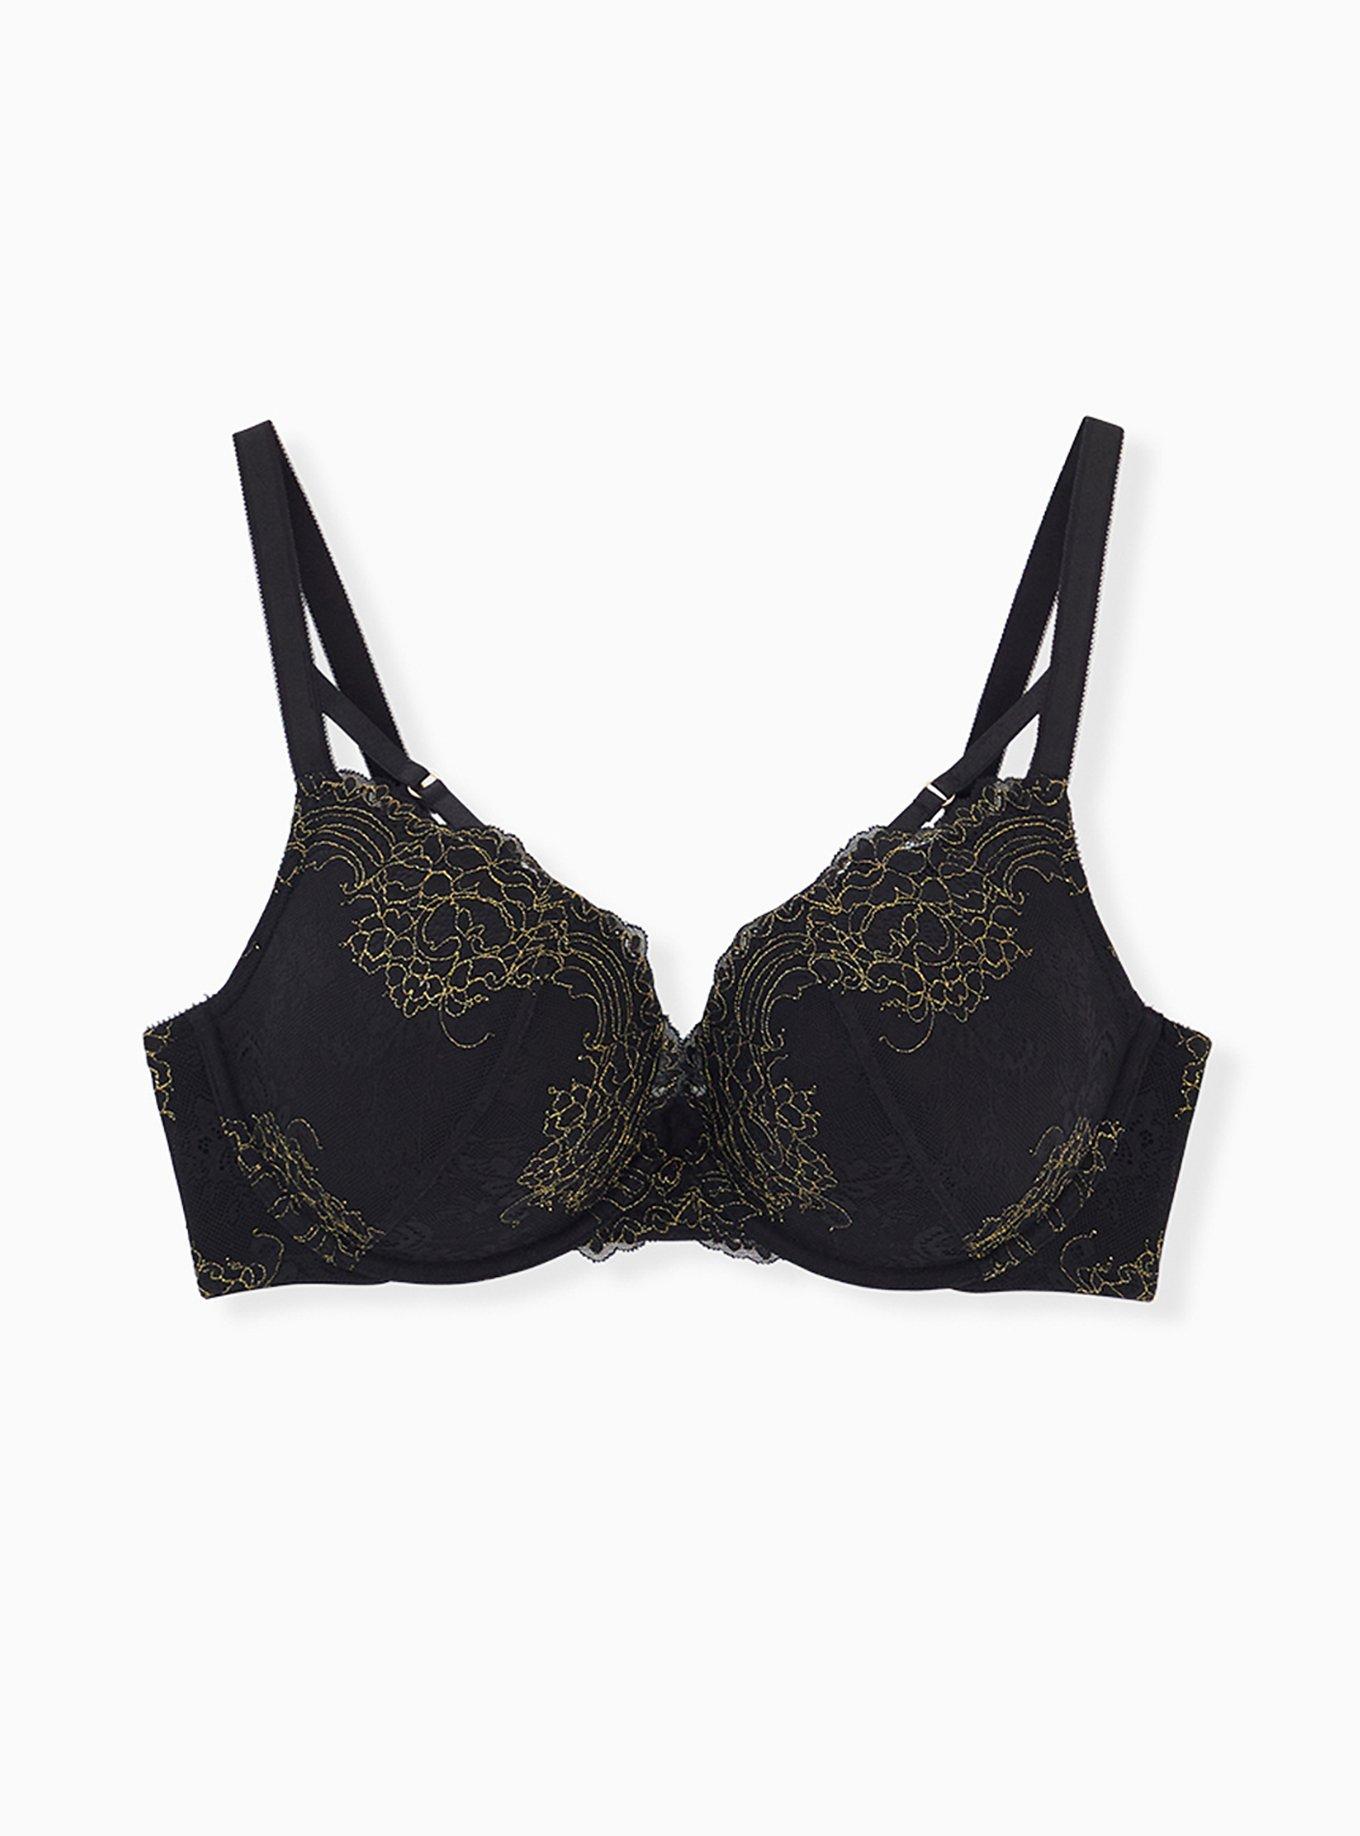 Black Lace Push Up Bra Plus Size Womens Low Plunge Bra In Sizes C 44 #7609  From Dou01, $10.01